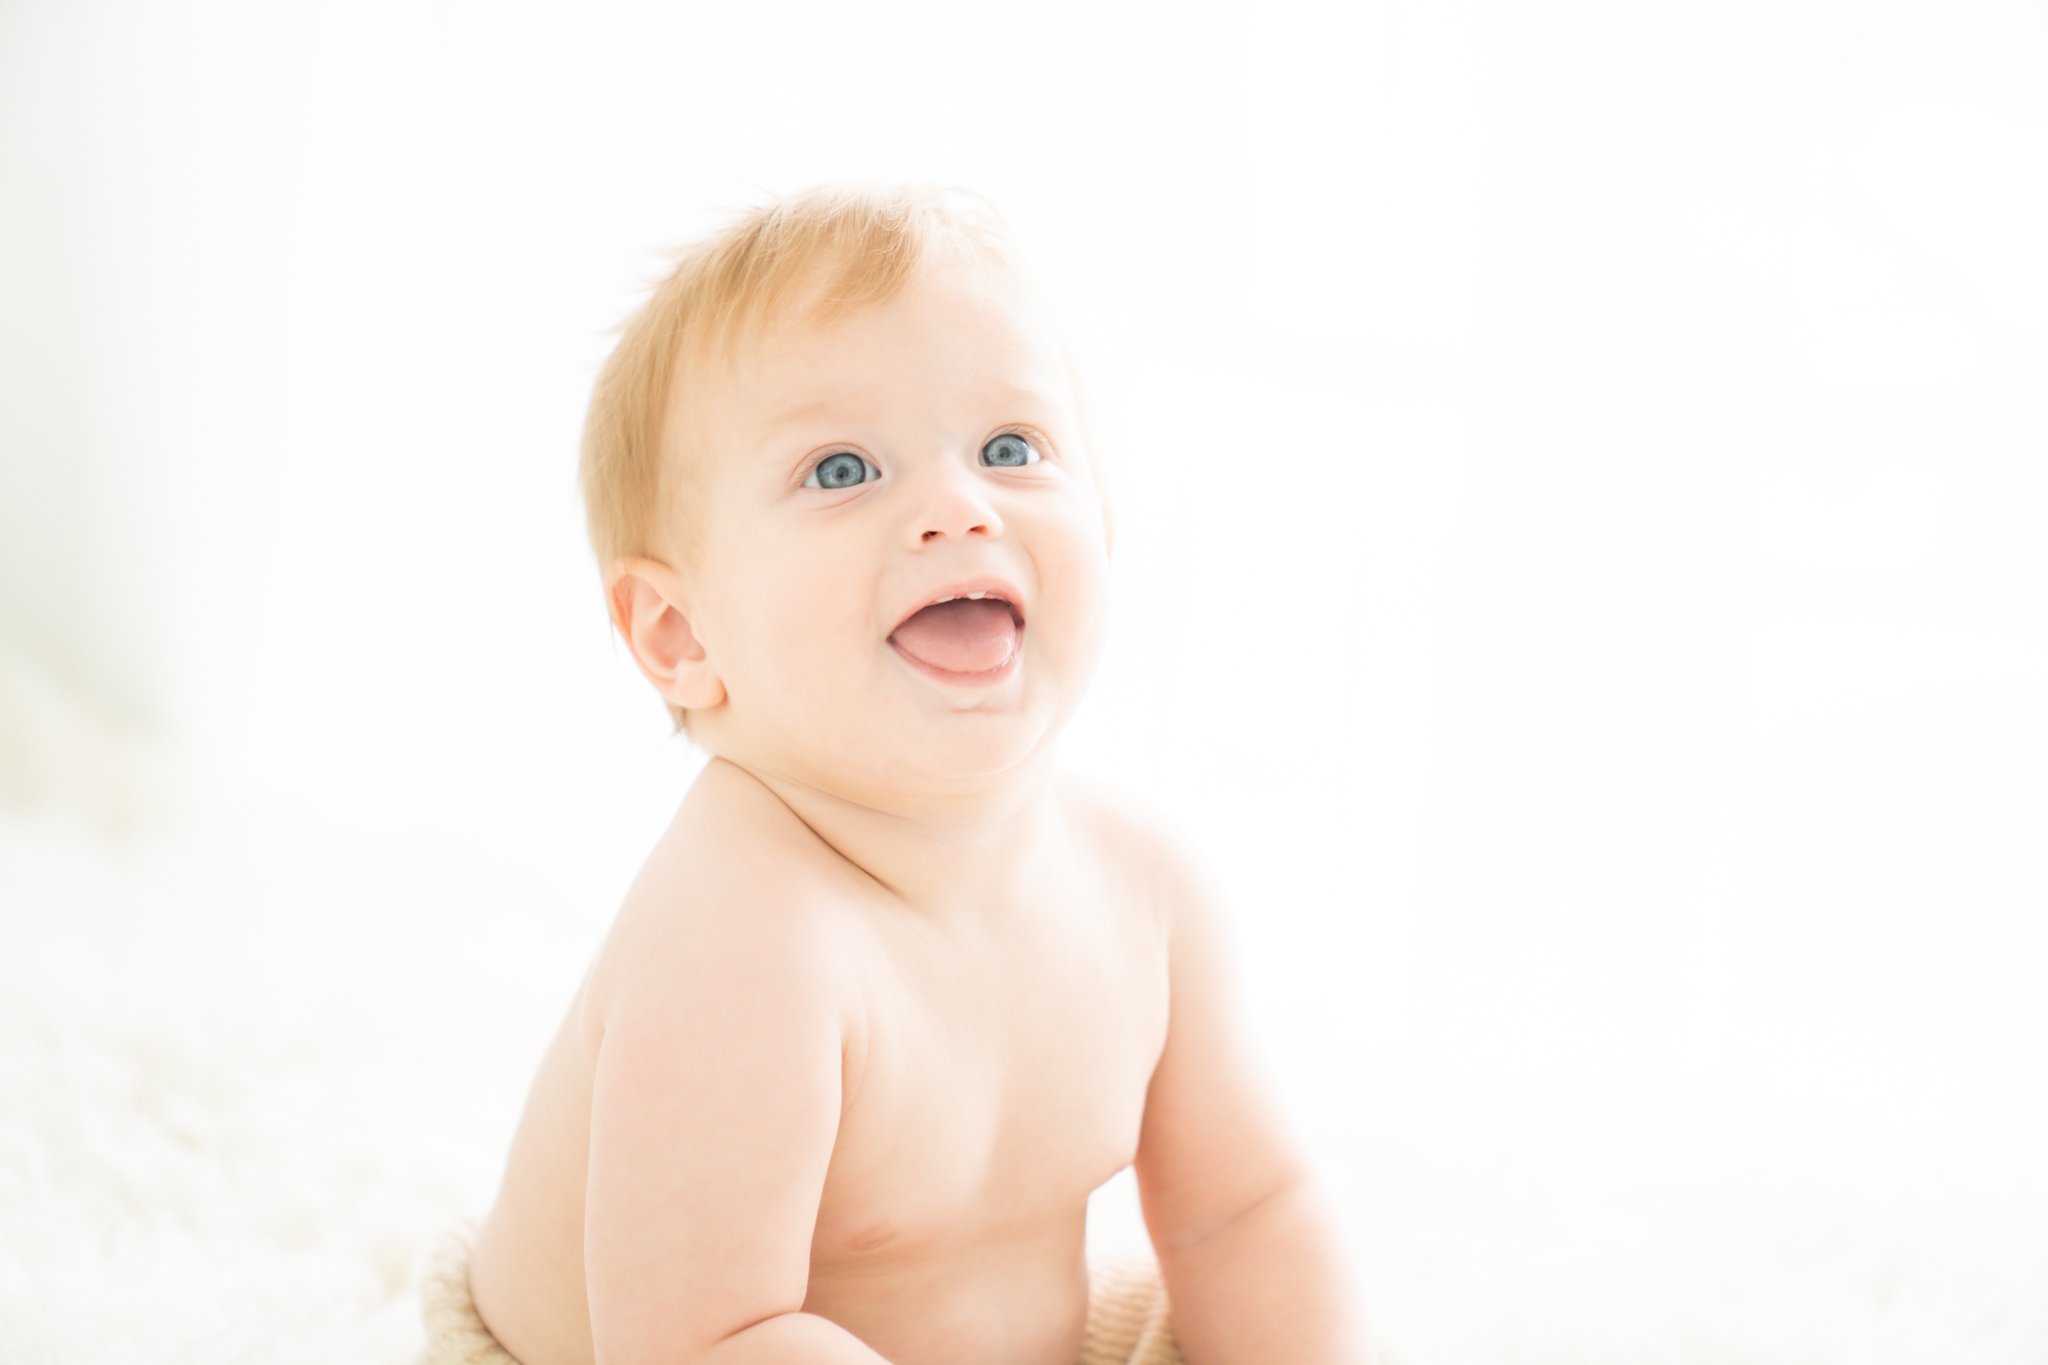 6 month old baby photography session  in Jupiter Fl studio